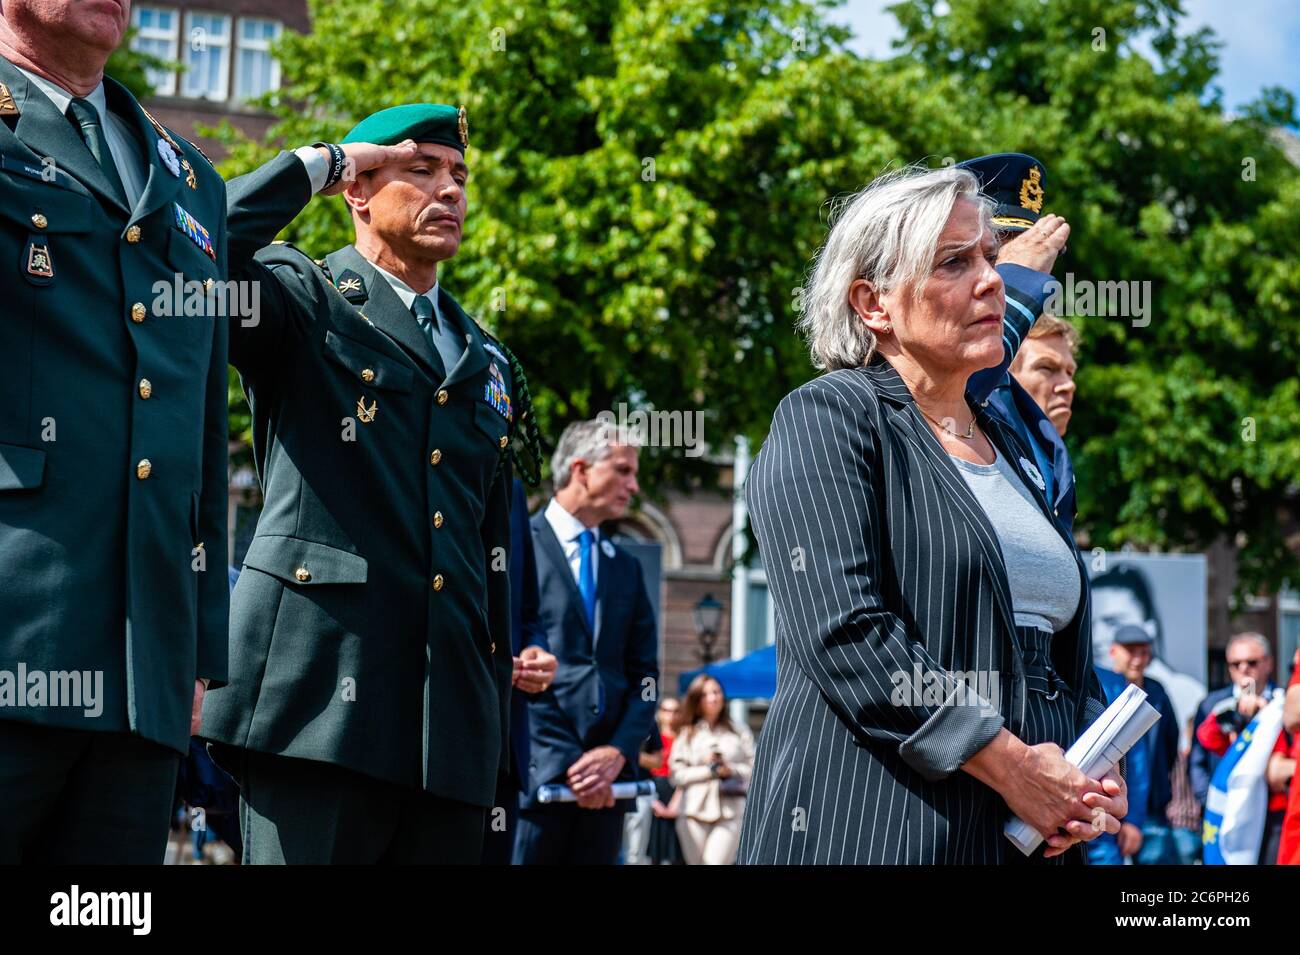 Minister of Defense Ank Bijleveld attends the ceremony.The National Memorial Srebrenica-Genocide is held every year on July 11 at Het Plein in The Hague since 1997. On this day, more than eight thousand victims of the genocide in Srebrenica are commemorated. Due to the Coronavirus situation, few people were allowed to stay at the square, the ceremony could be also followed via live stream. Former Minister Jan Pronk, and Minister of Defense Ank Bijleveld both gave a speech, and the names of the victims were read followed by a two minute moment of silence. This year the square was surrounded wit Stock Photo